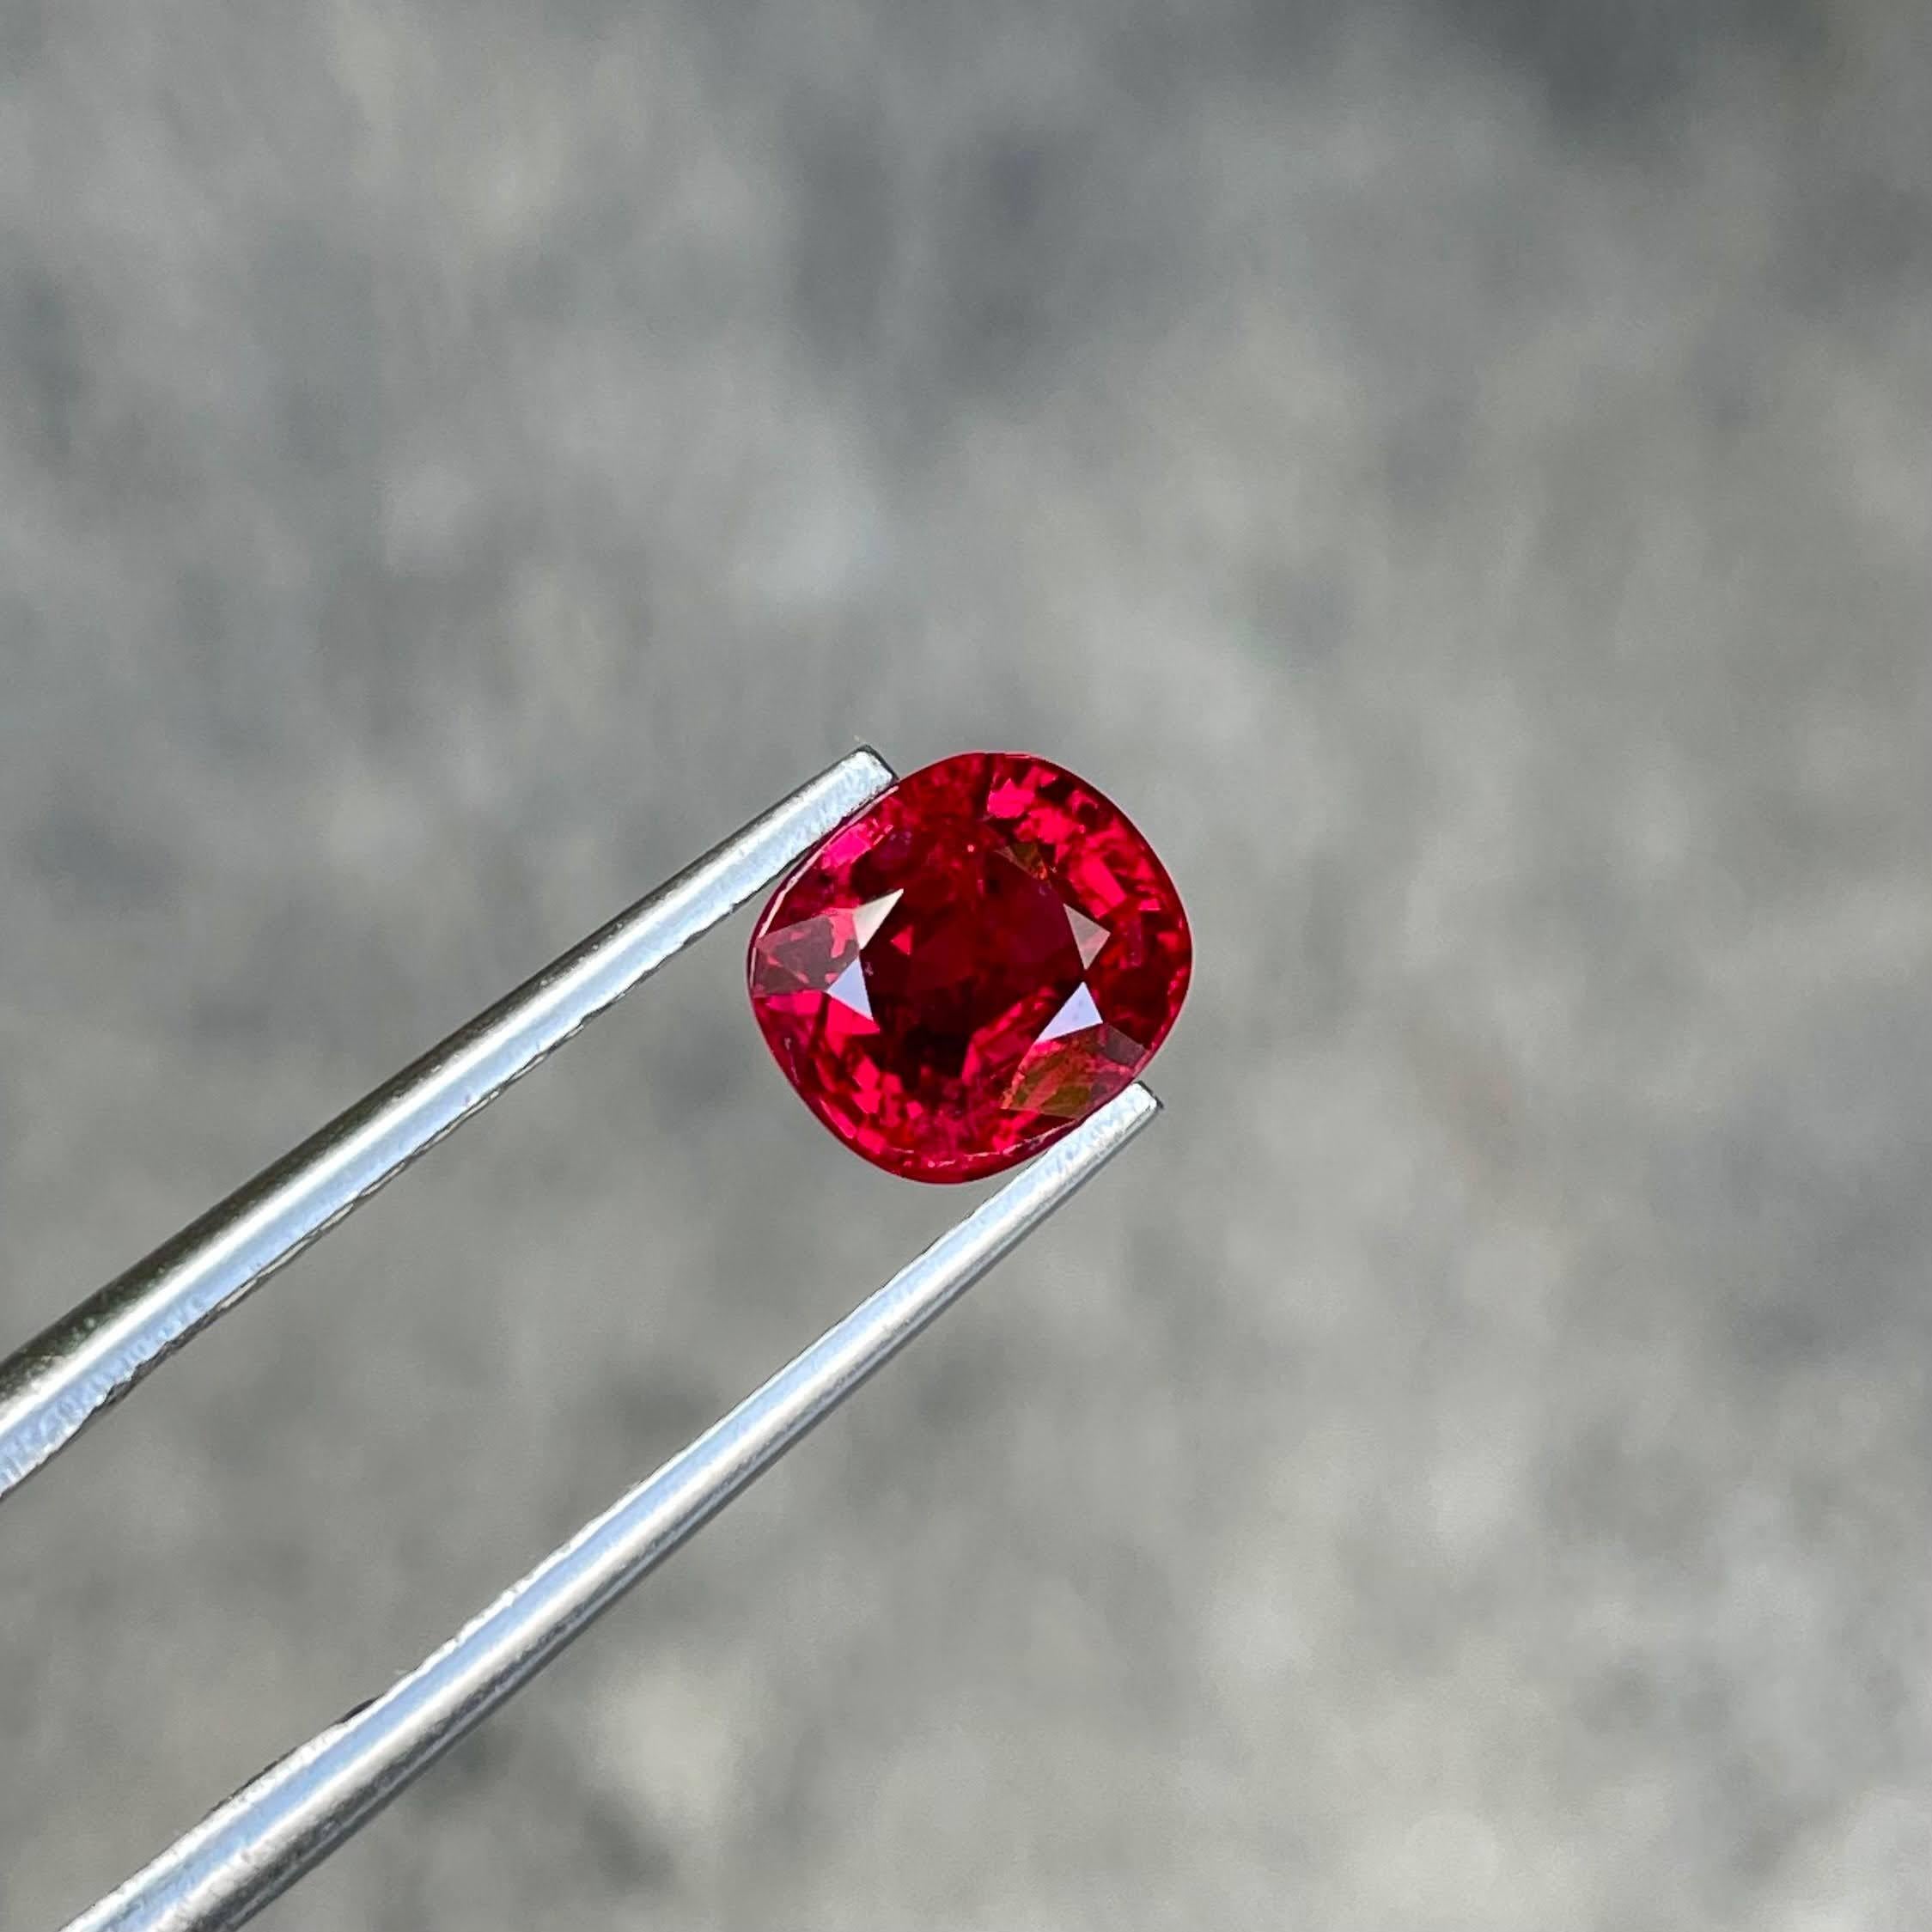 2.05 carats 
7.48x6.69x4.90 mm
Treatment None
Clarity VVS
Origin Burma
Shape Cushion
Cut Step Cushion



The exquisite beauty of a 2.05-carat Red Burmese Spinel is captured in its mesmerizing Step Cushion Cut, showcasing the gemstone's natural